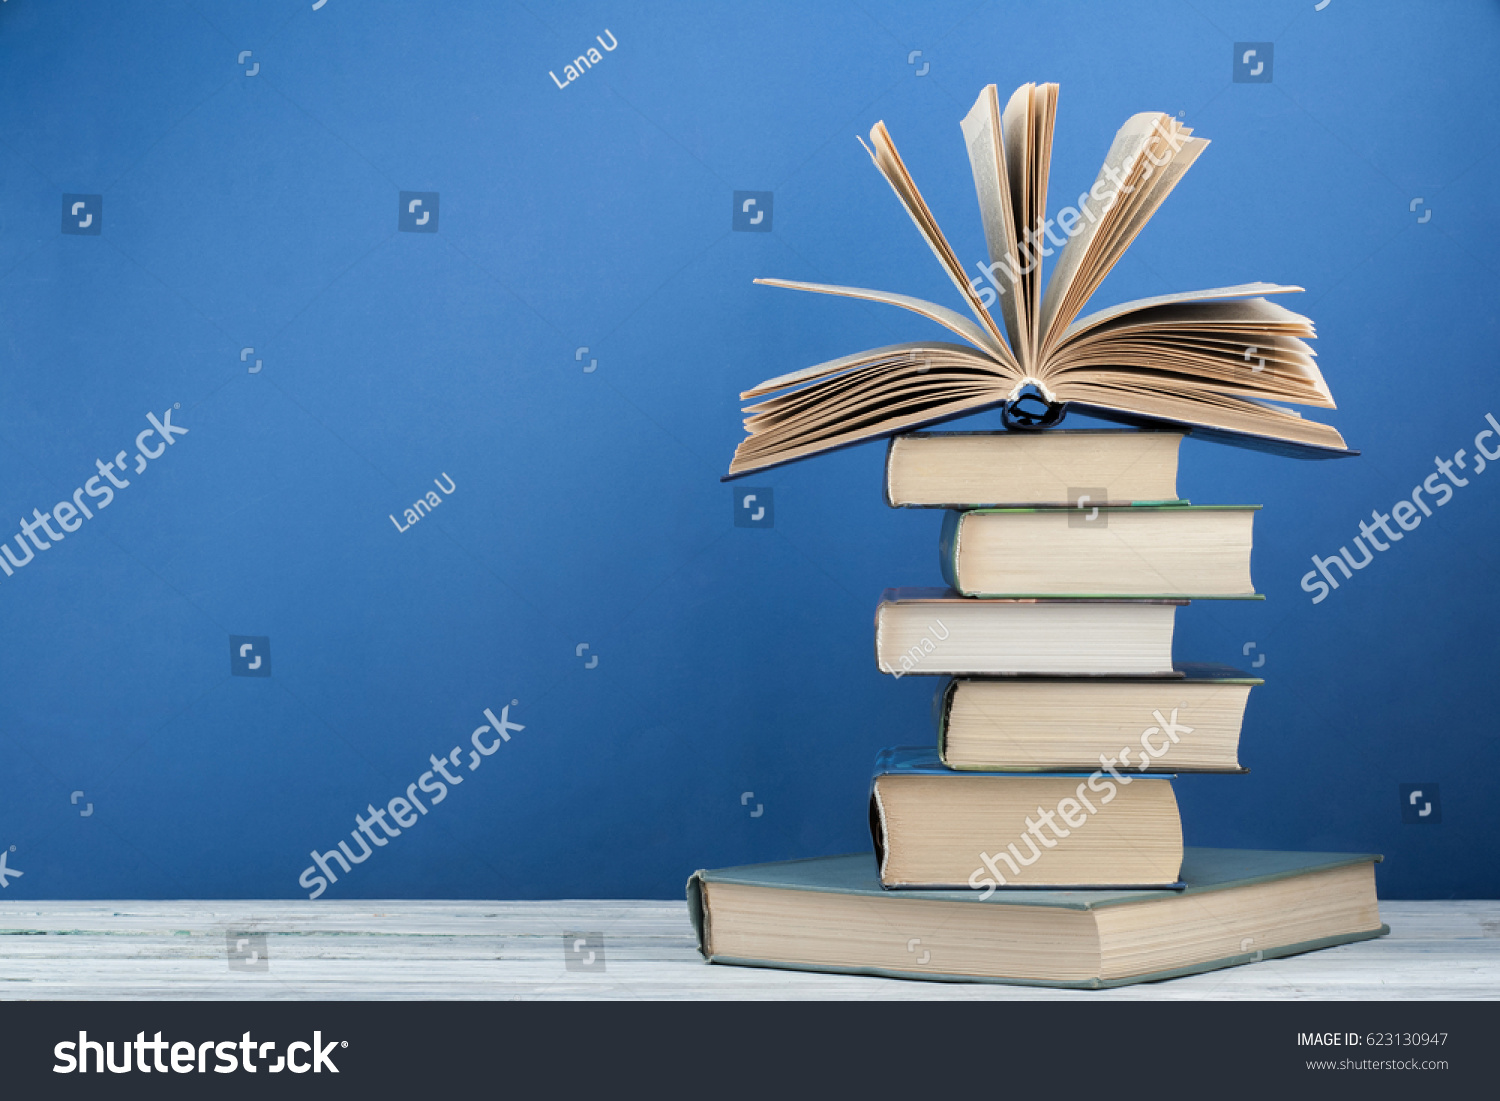 Stack of colorful books. Education background. Back to school. Book, hardback colorful books on wooden table. Education business concept. Copy space for text #623130947